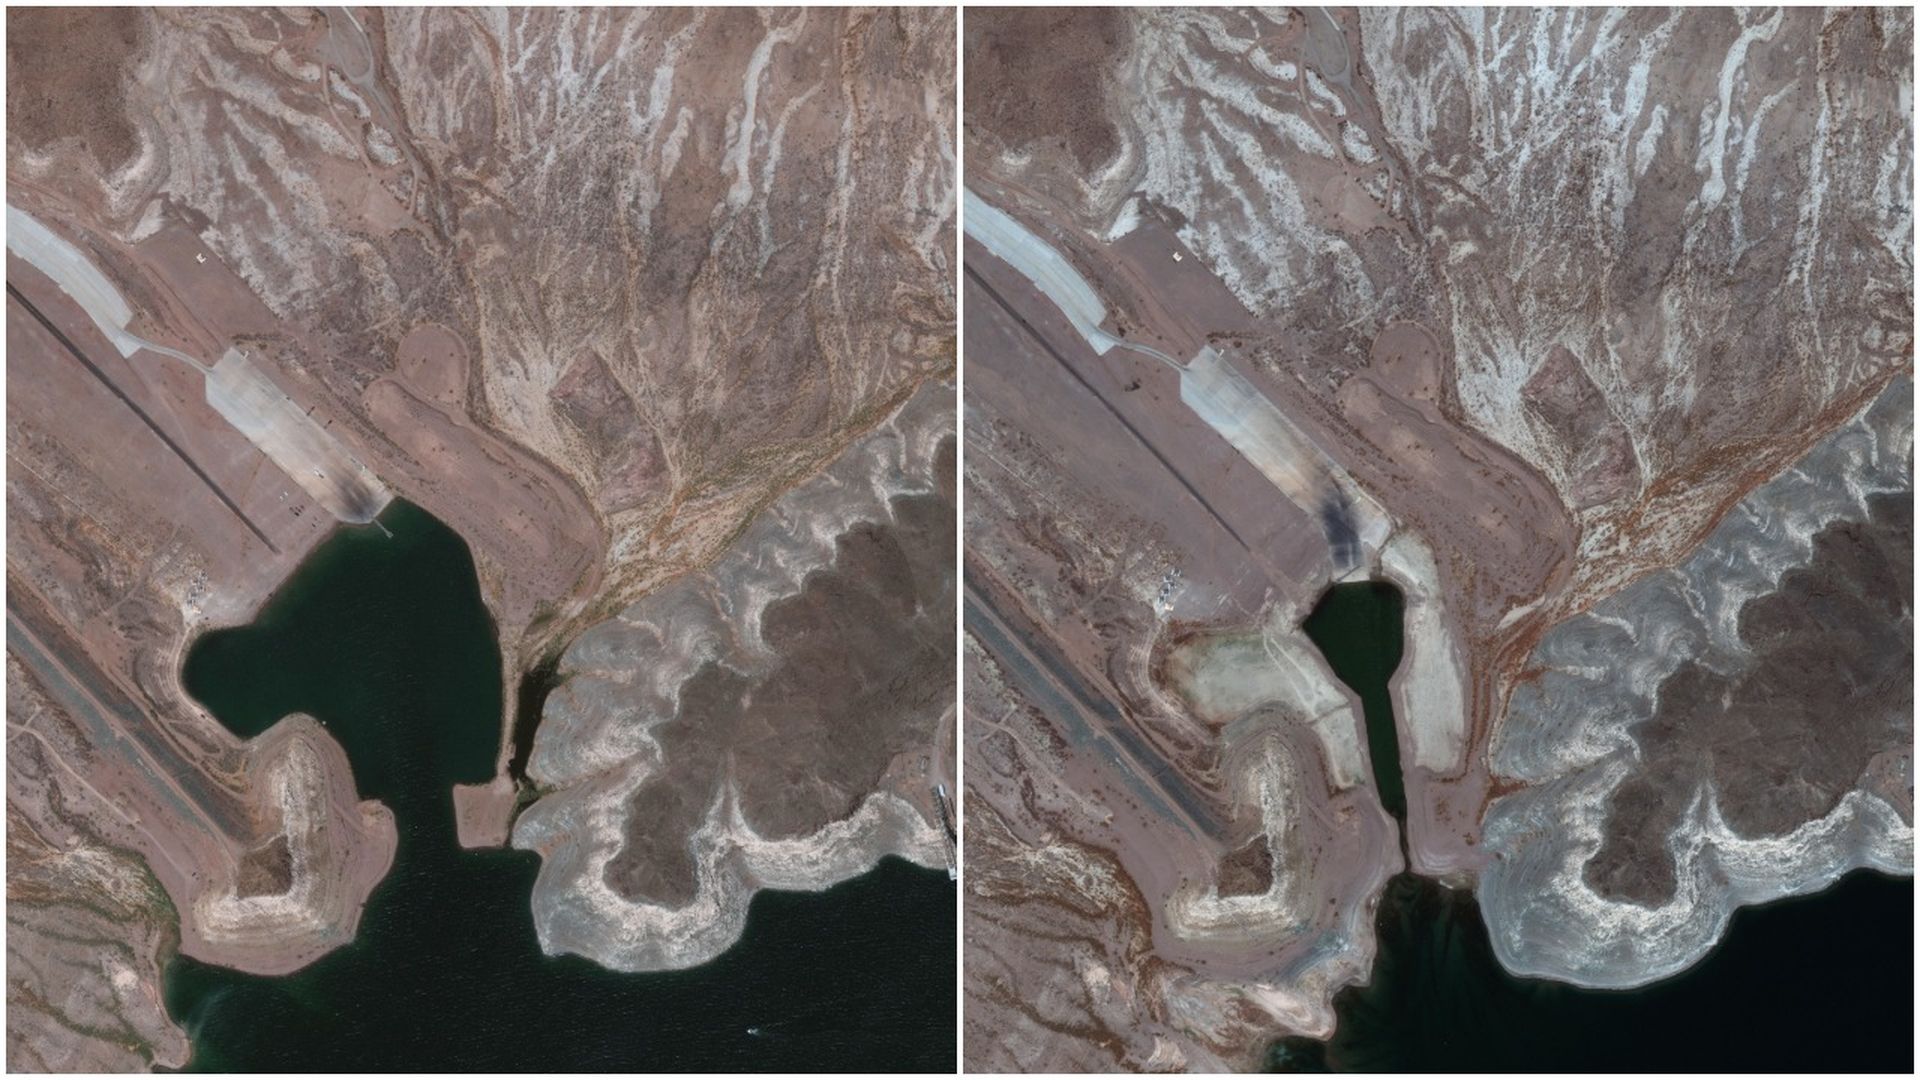 These images show the low water levels at the Boulder Harbor Launch Ramp at Lake Mead in Boulder City, Nevada.